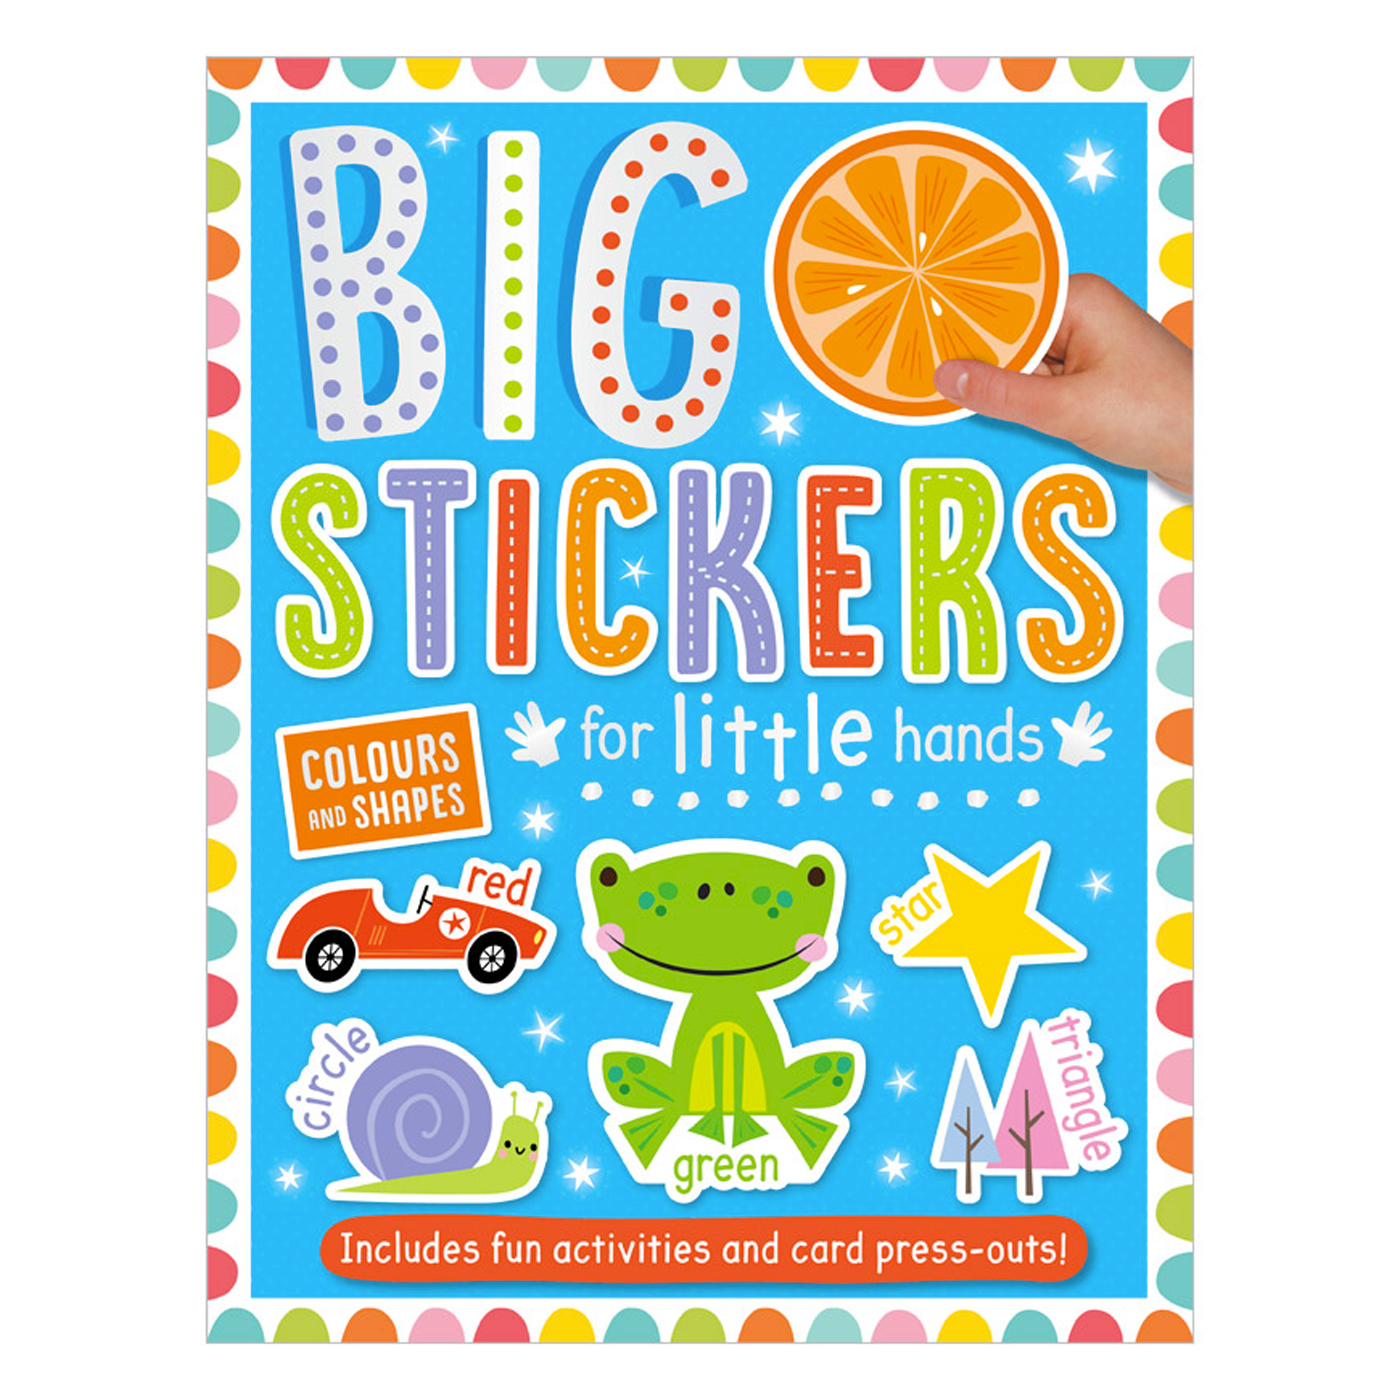  Big Stickers for Little Hands Colours and Shapes